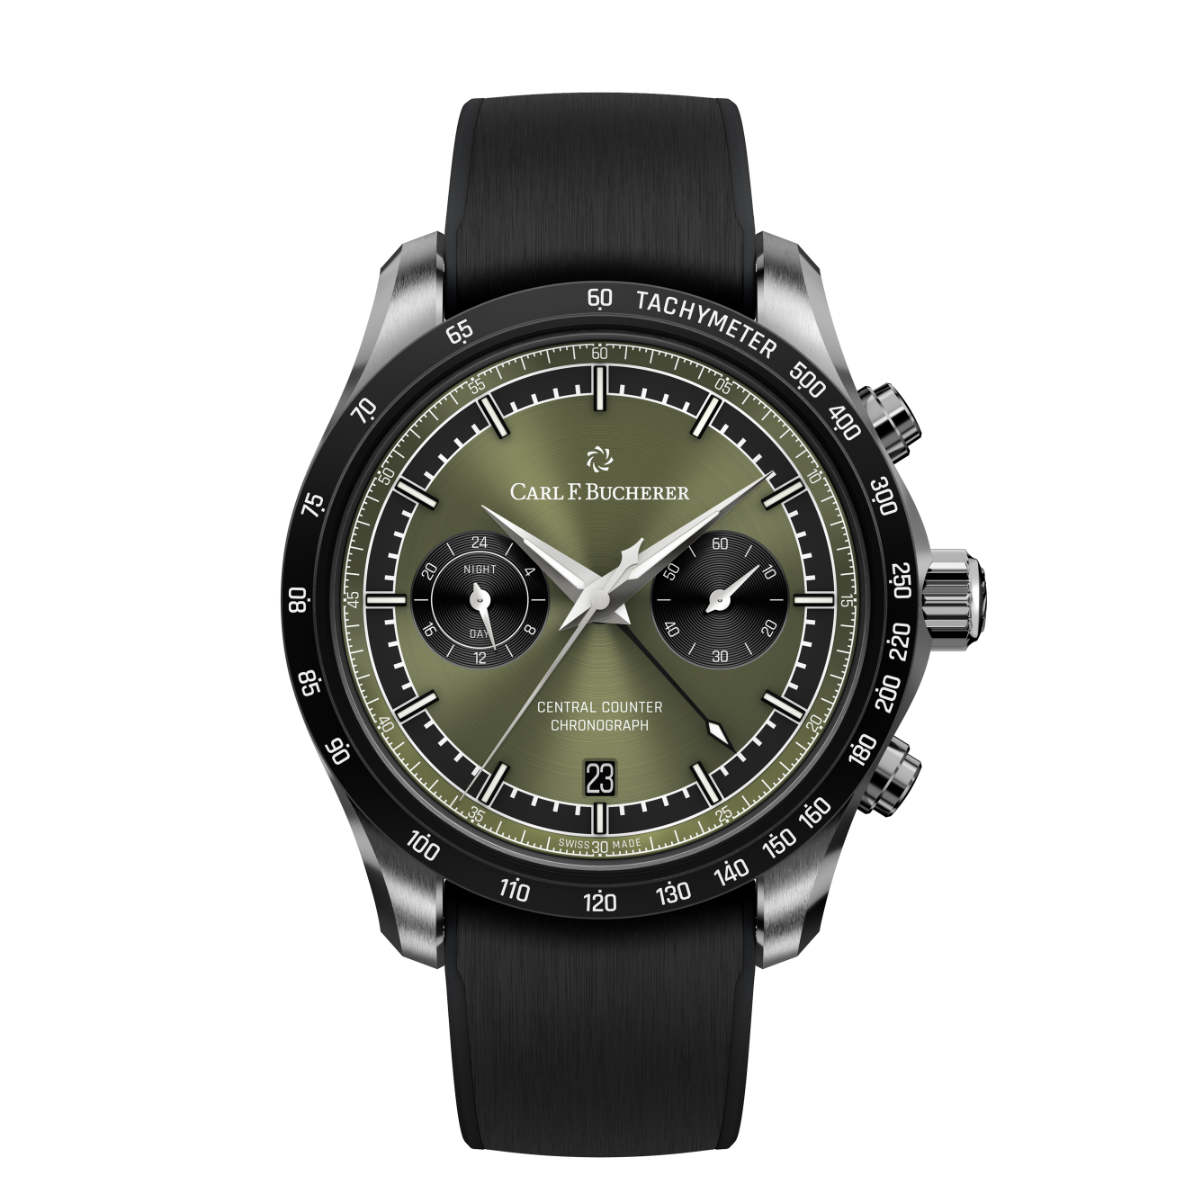 The Perfect Watch To Inspire The Ideal Work/Life Balance: The Manero Central Counter